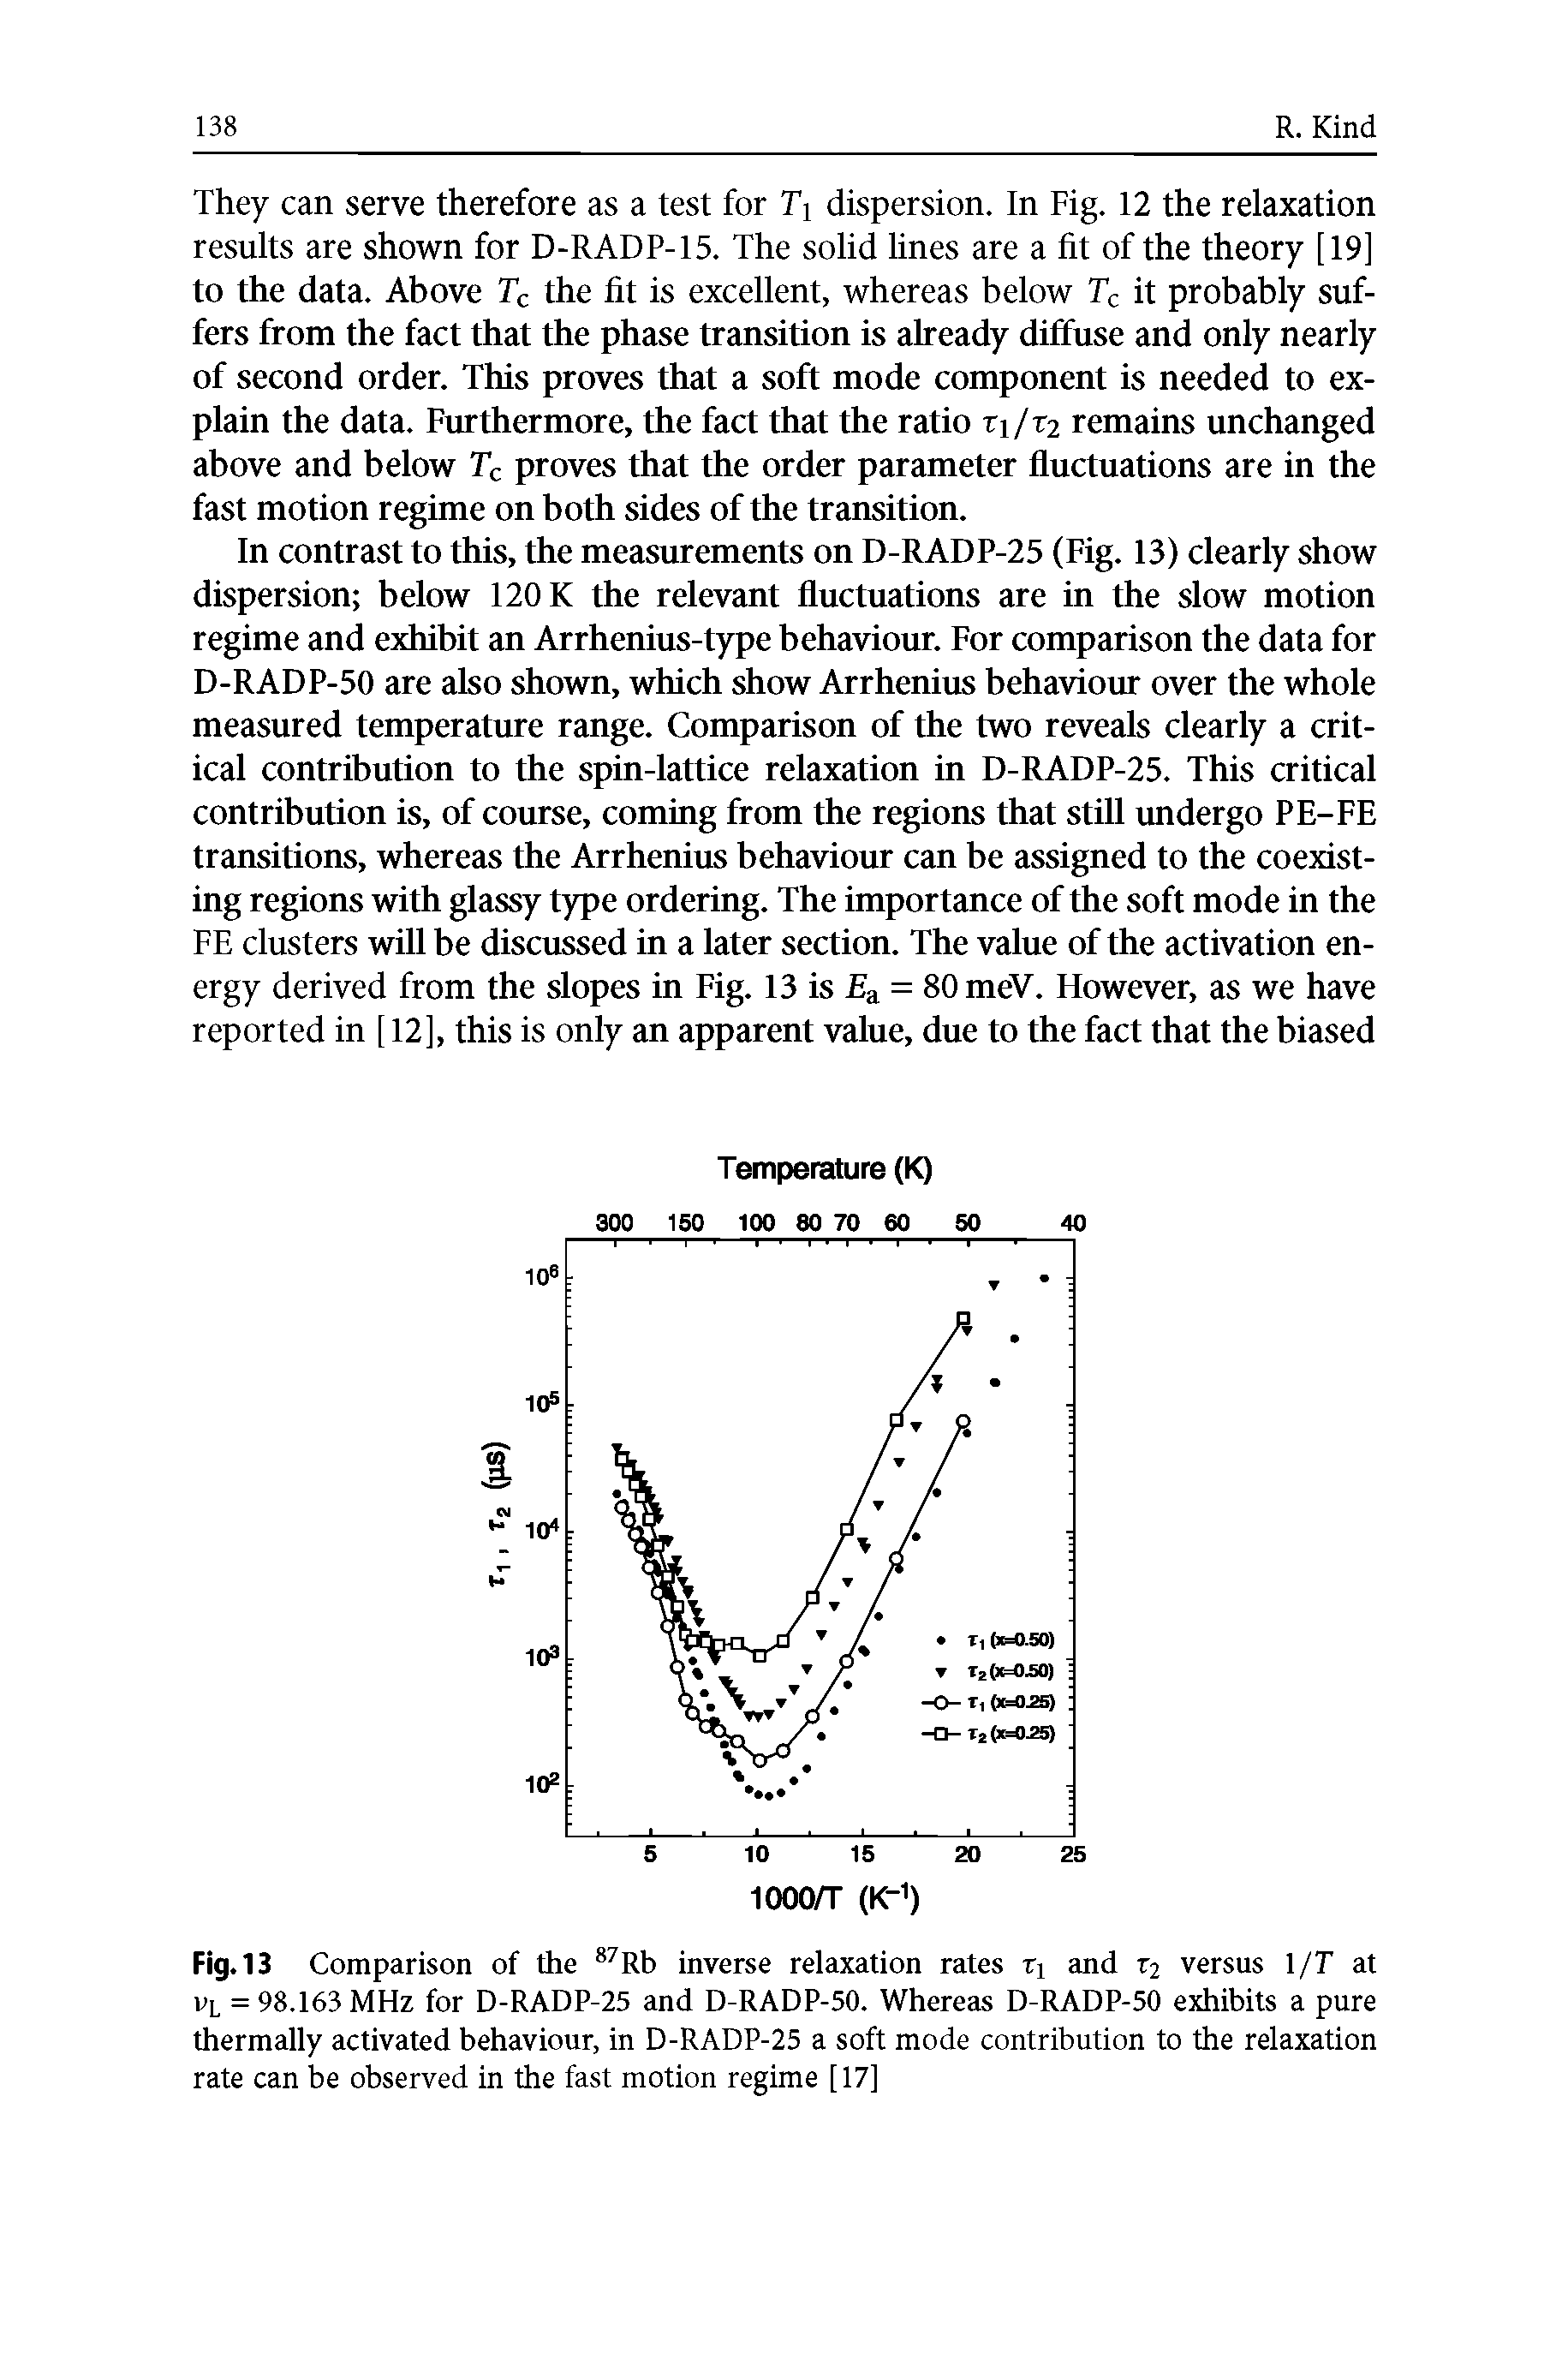 Fig. 13 Comparison of the inverse relaxation rates ti and T2 versus 1/T at vi = 98.163 MHz for D-RADP-25 and D-RADP-50. Whereas D-RADP-50 exhibits a pure thermally activated behaviour, in D-RADP-25 a soft mode contribution to the relaxation rate can be observed in the fast motion regime [17]...